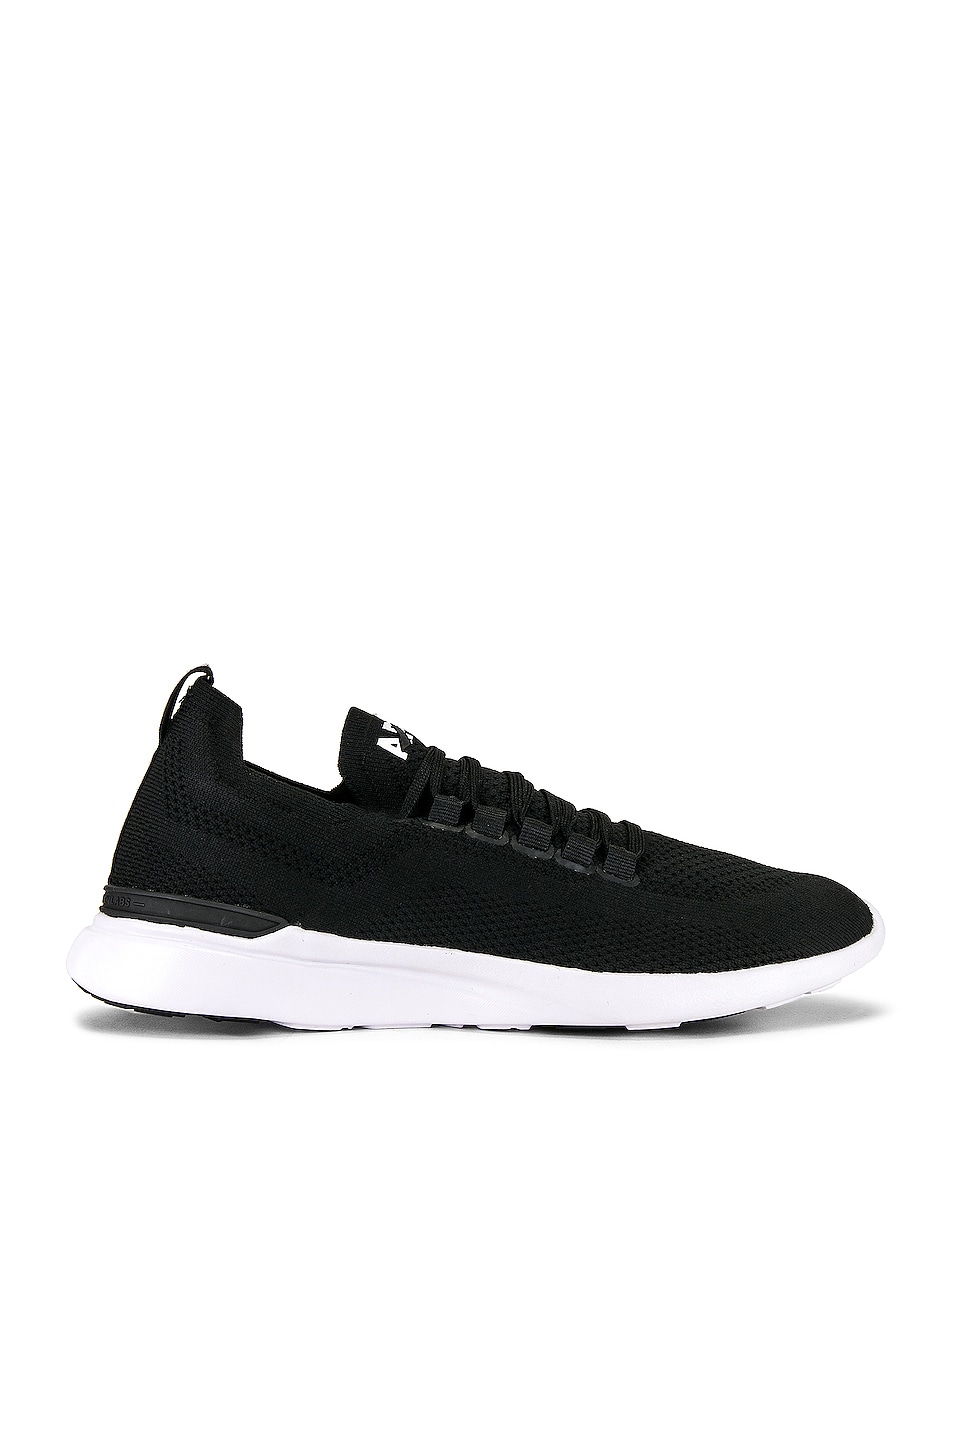 Image 1 of APL: Athletic Propulsion Labs Techloom Breeze in Black & White